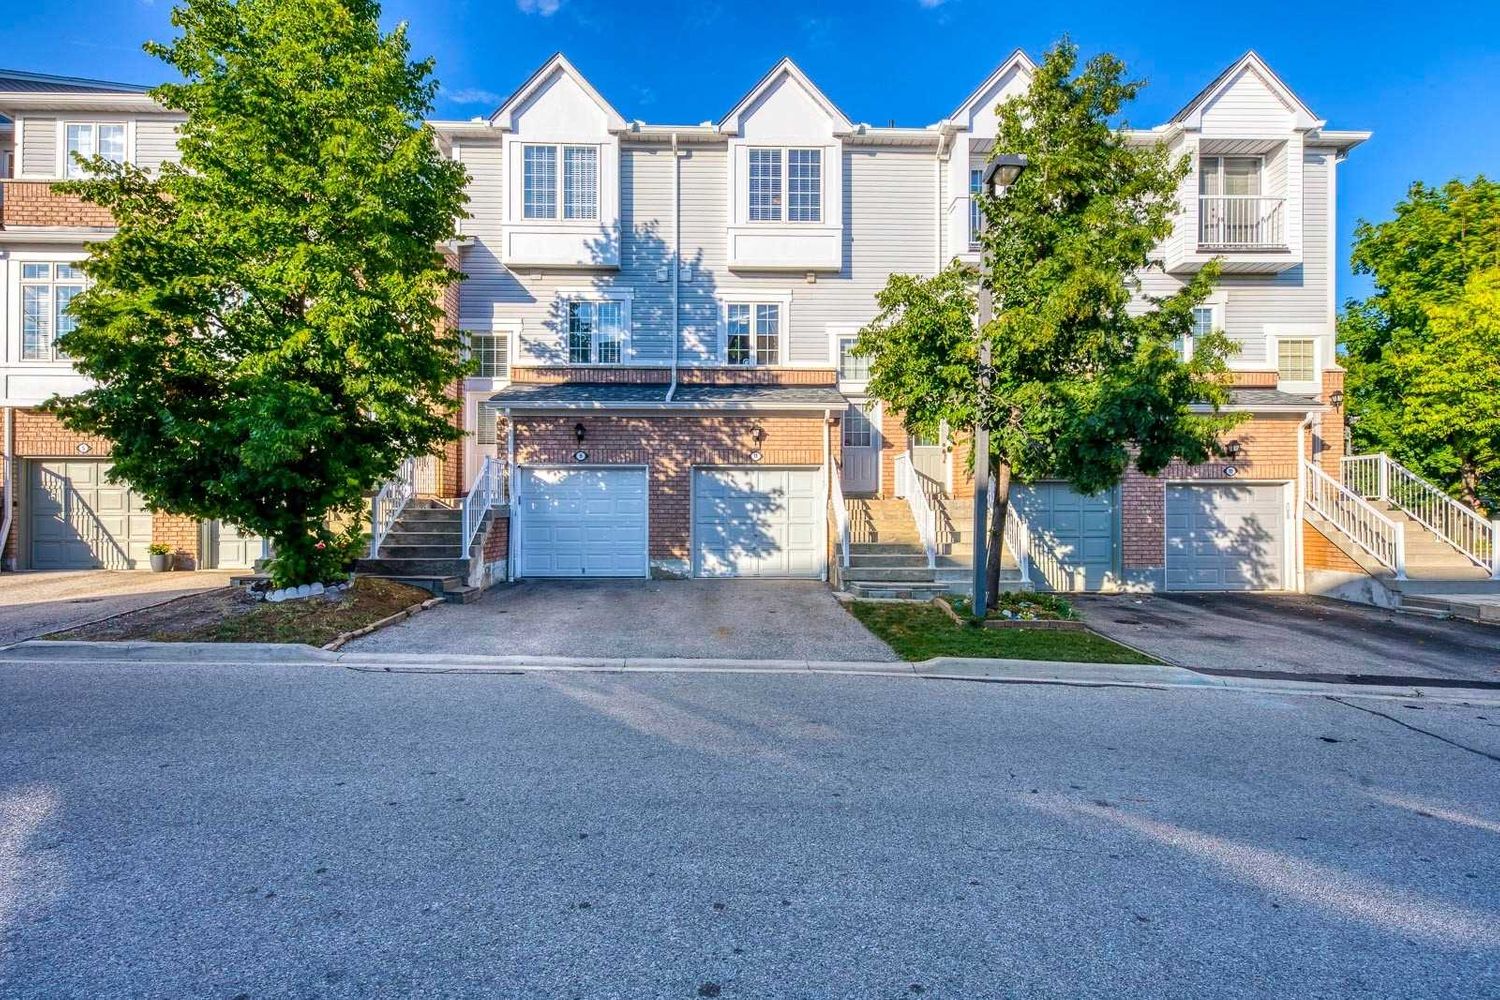 280 Hillcrest Avenue. 280 Hillcrest Avenue Townhomes is located in  Mississauga, Toronto - image #1 of 2